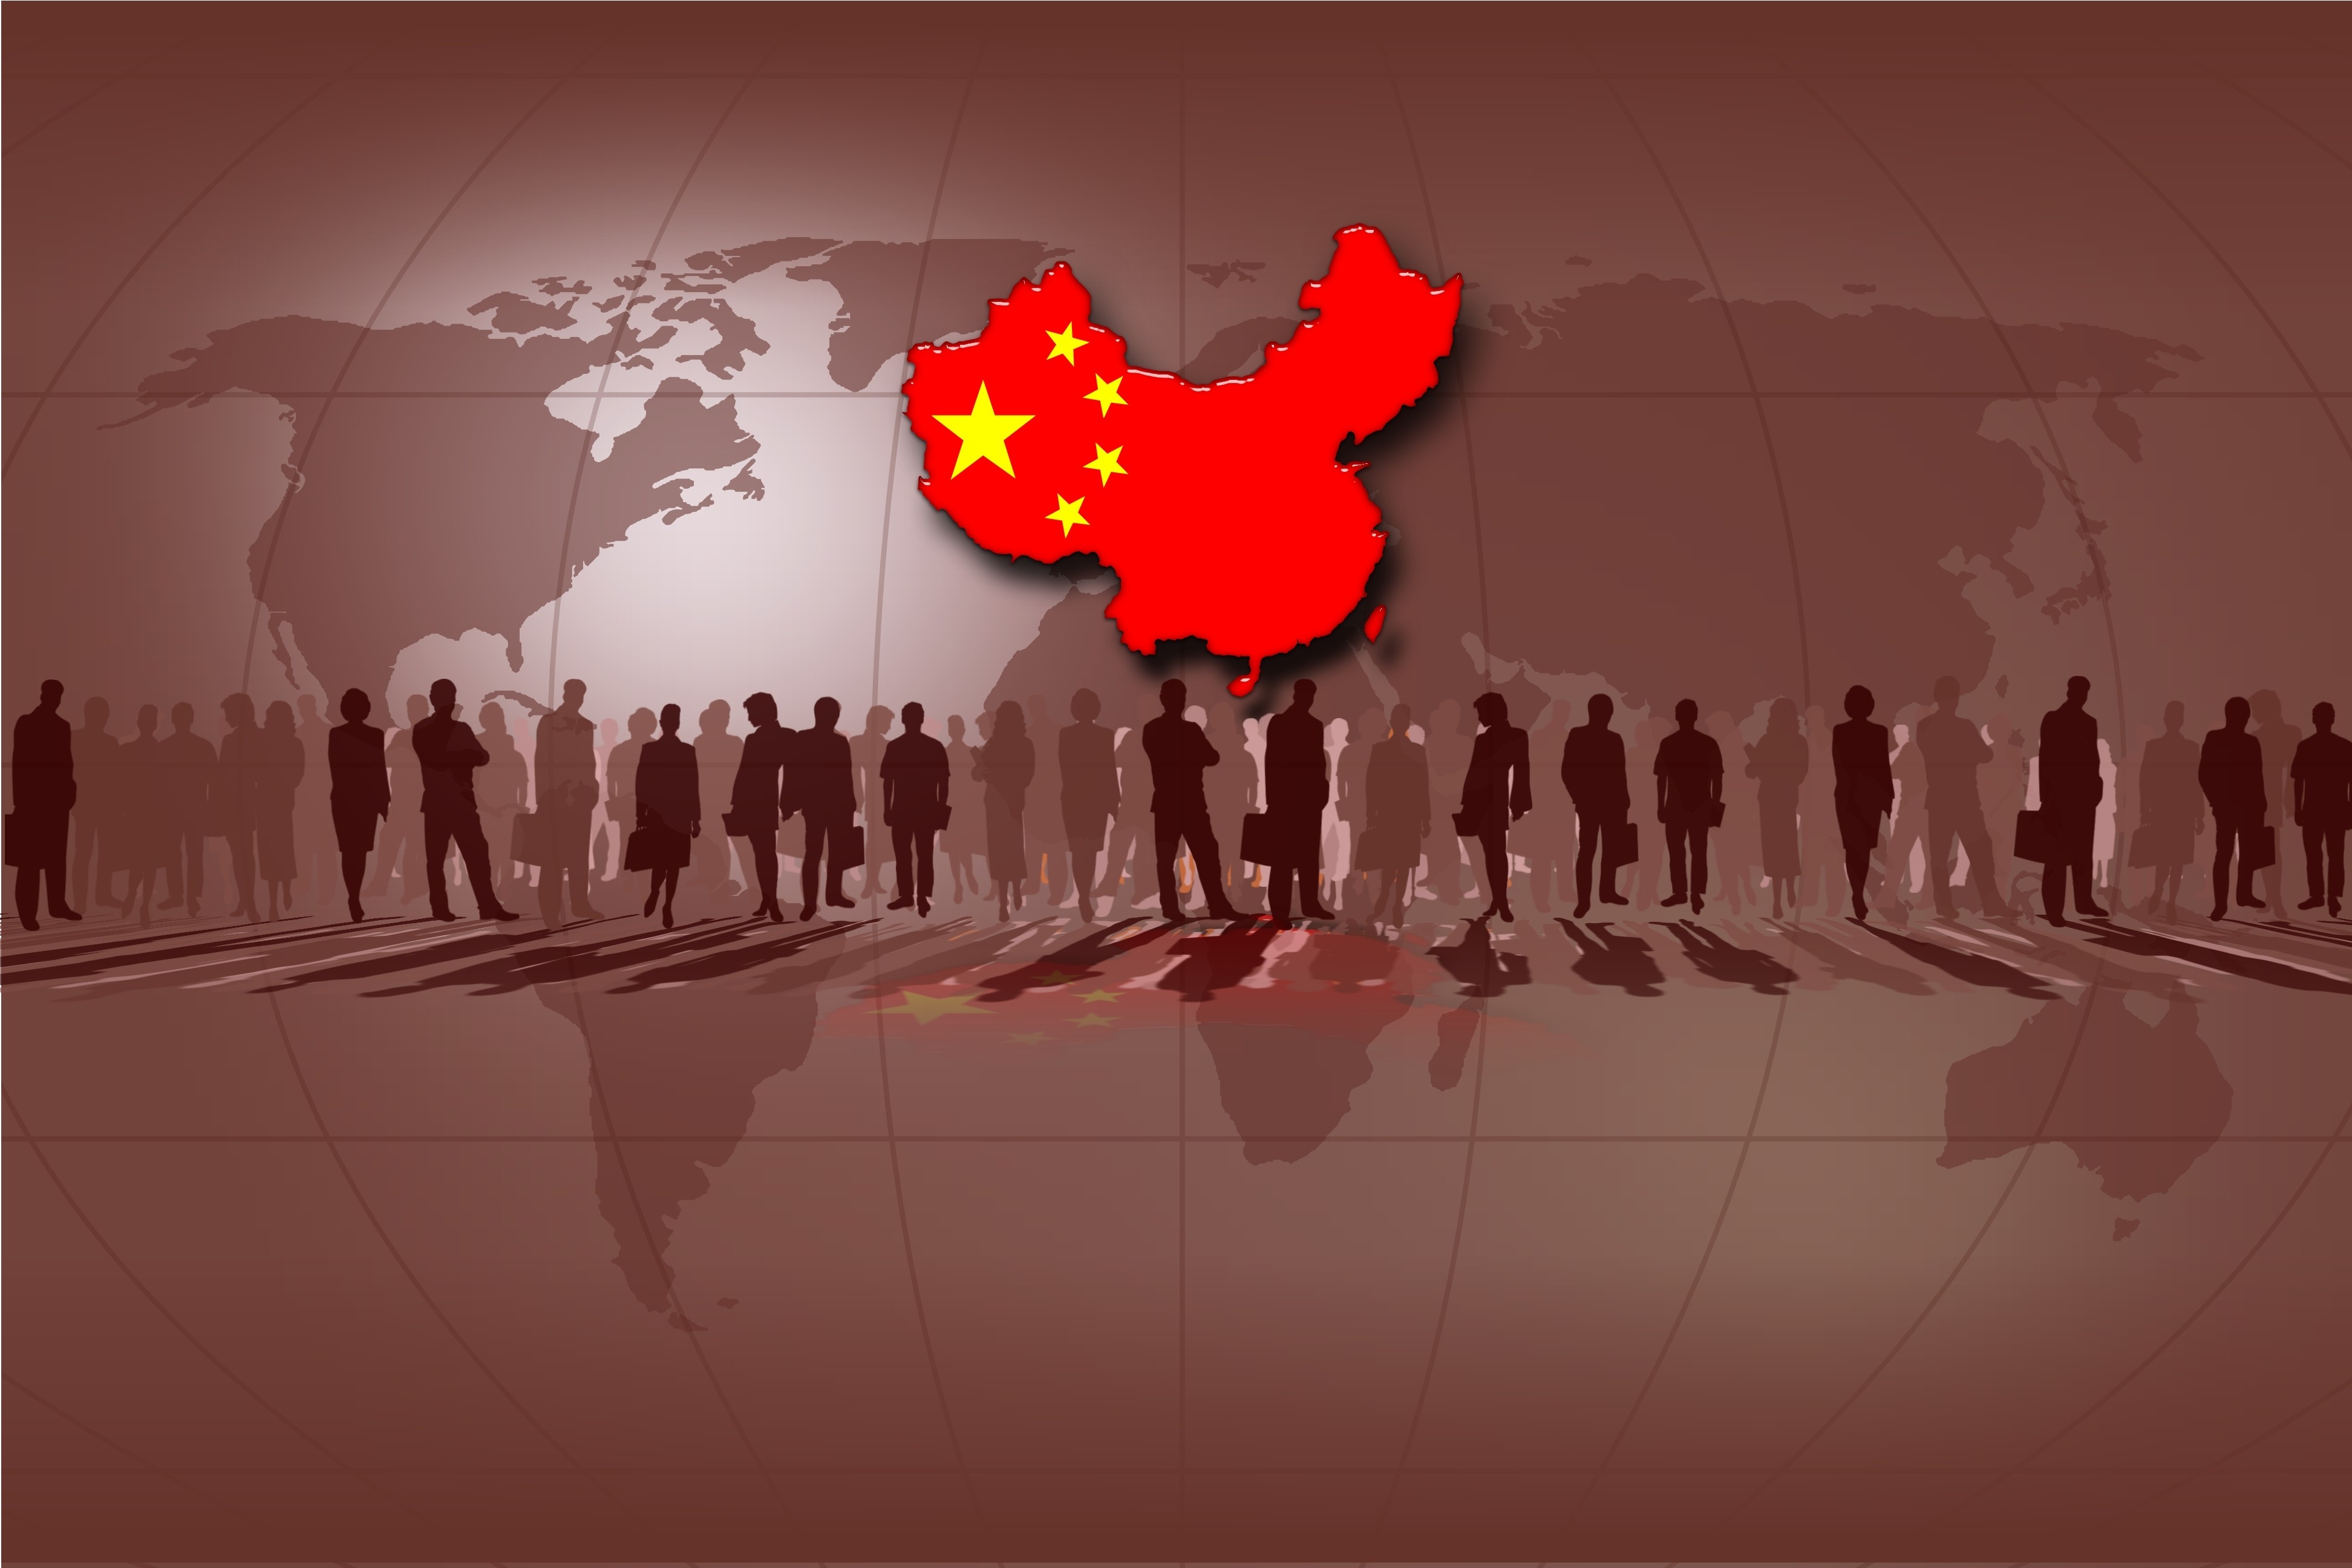 China and the rest of the world need a sense of perspective if global conflicts are to be resolved. Photo: Shutterstock